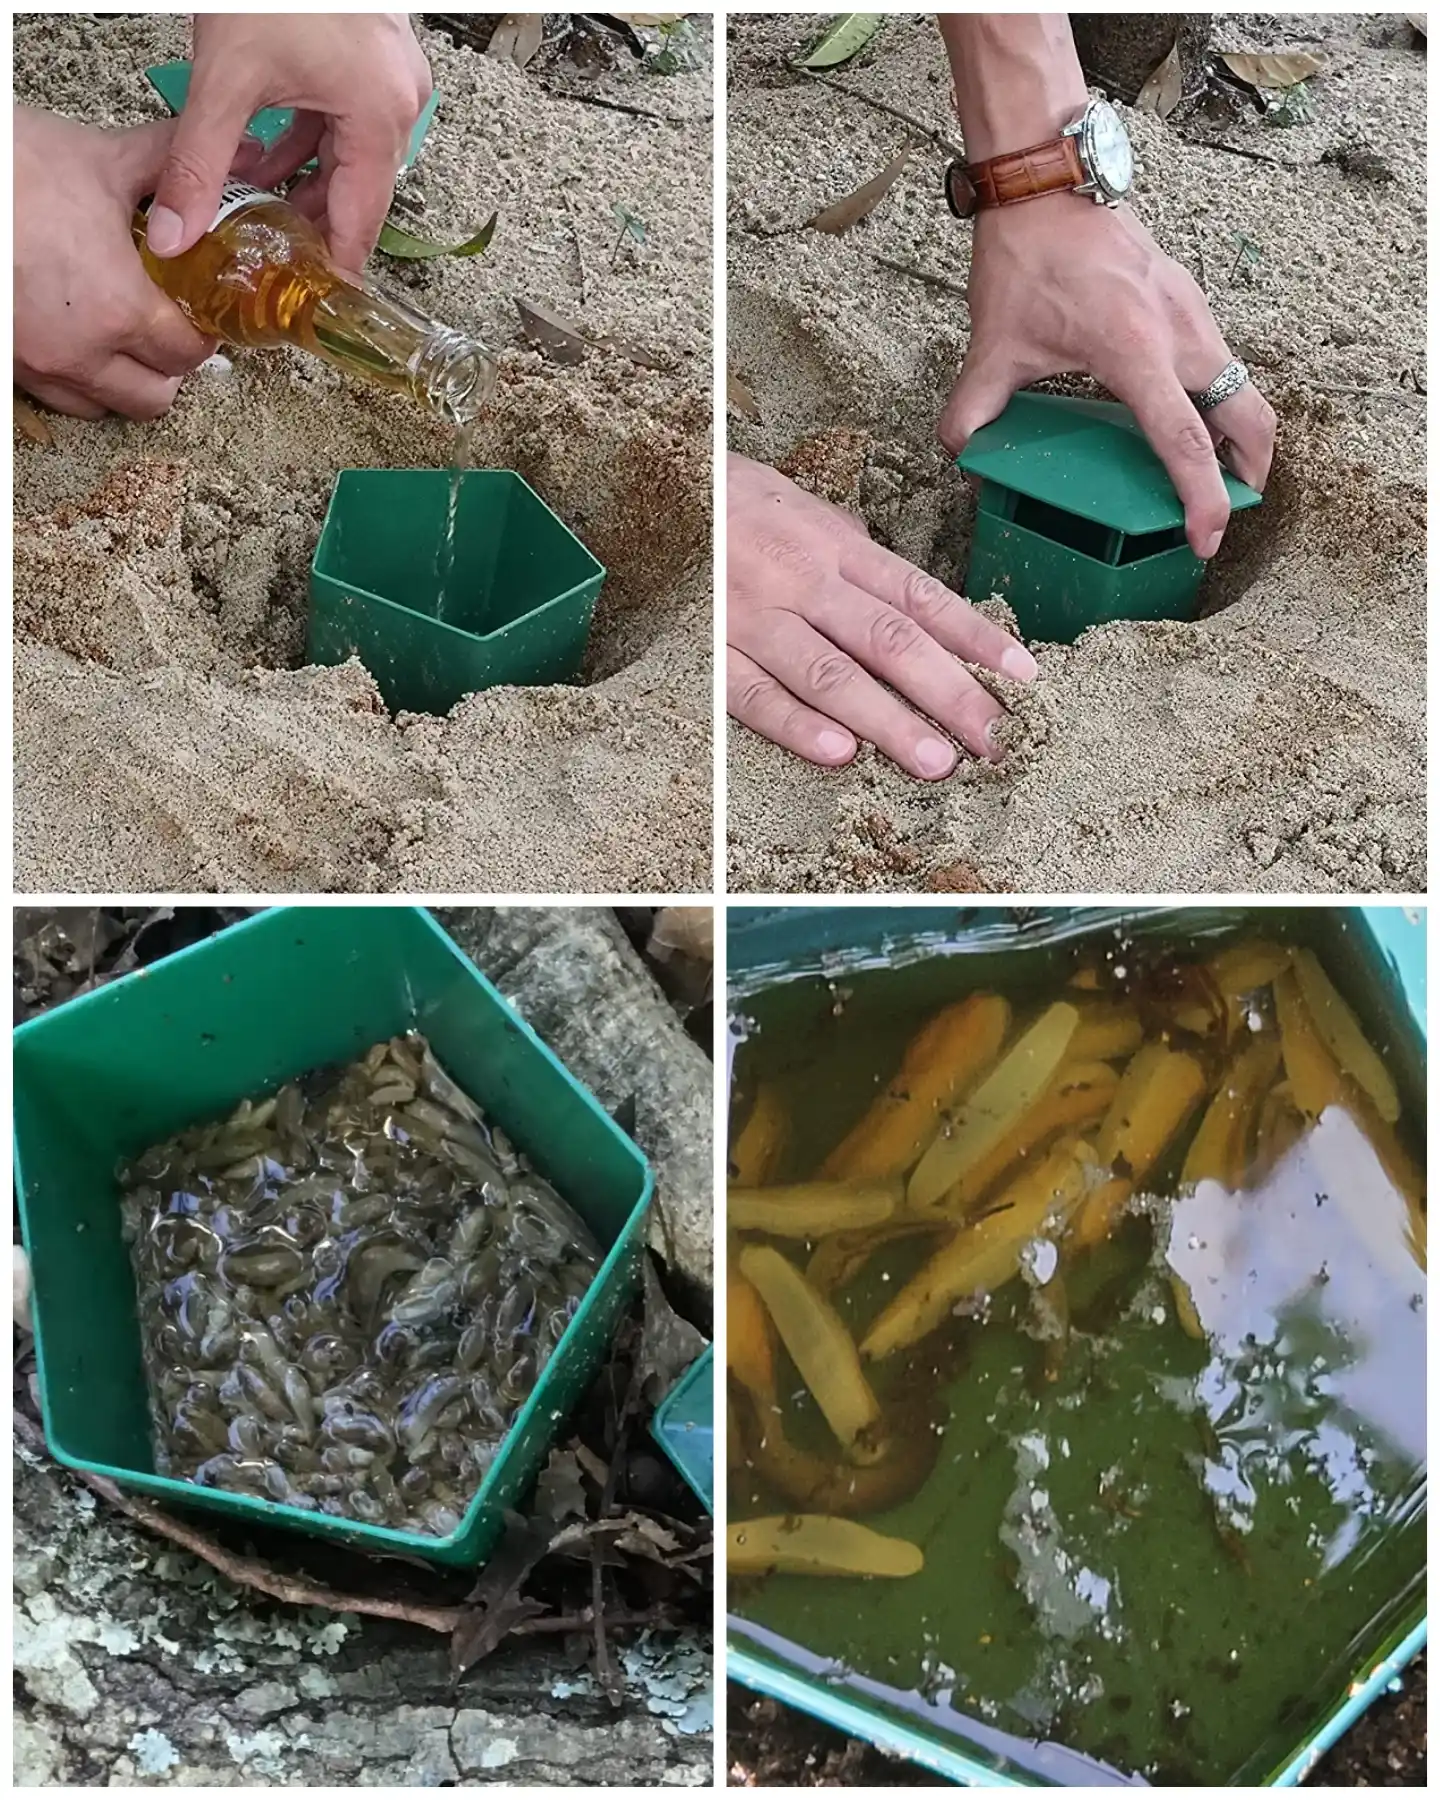 A four way image collage, the first image shows a beer being poured into a green container that is buried in the sand. The next image shows a hand putting a green lid on the green container. The third image shows the inside of the container and it is full of slugs, the fourth image shows a closer up view of the insects inside. 